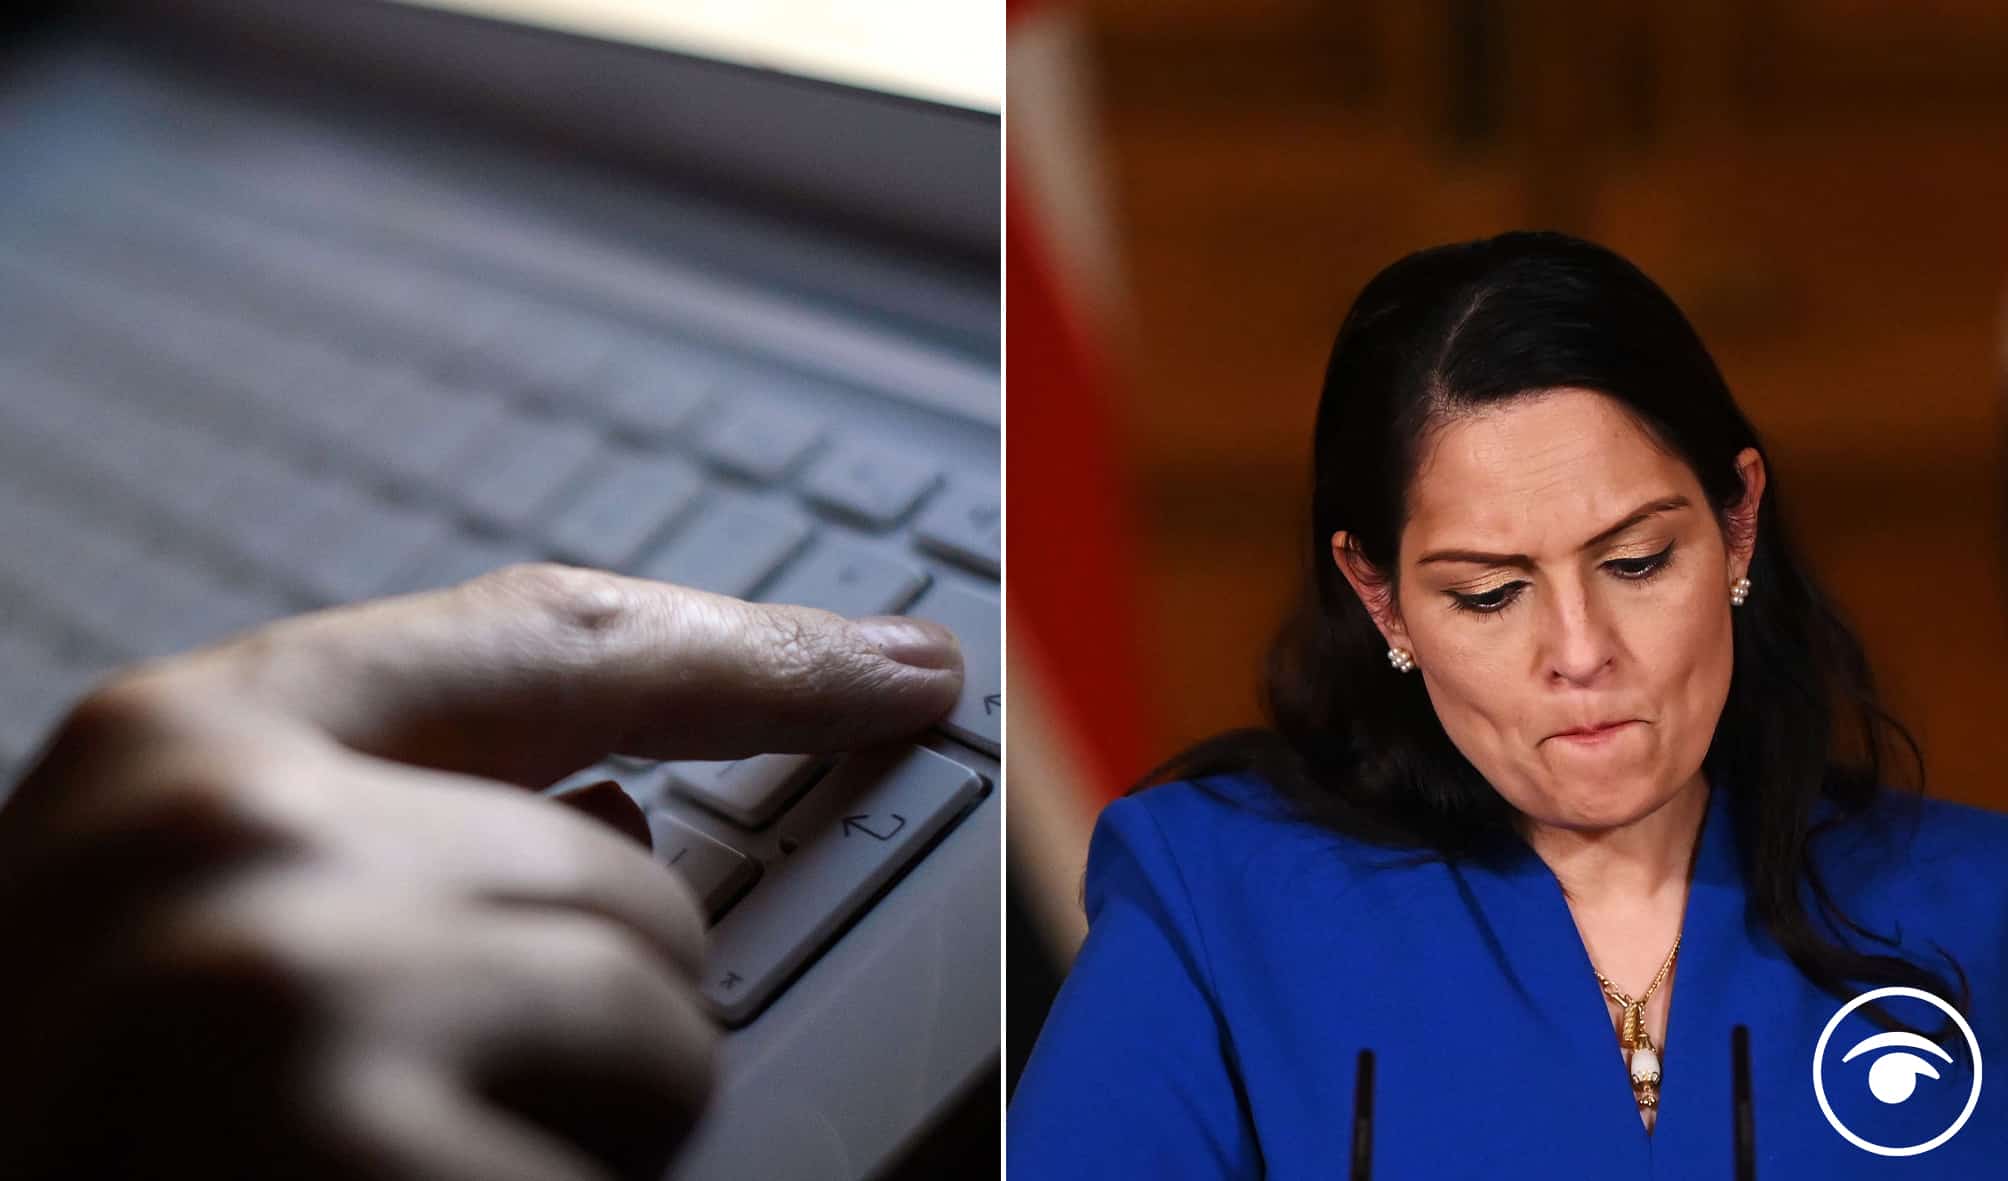 Minister blames human error and ‘defective code’ causing 150,000 police records to vanish